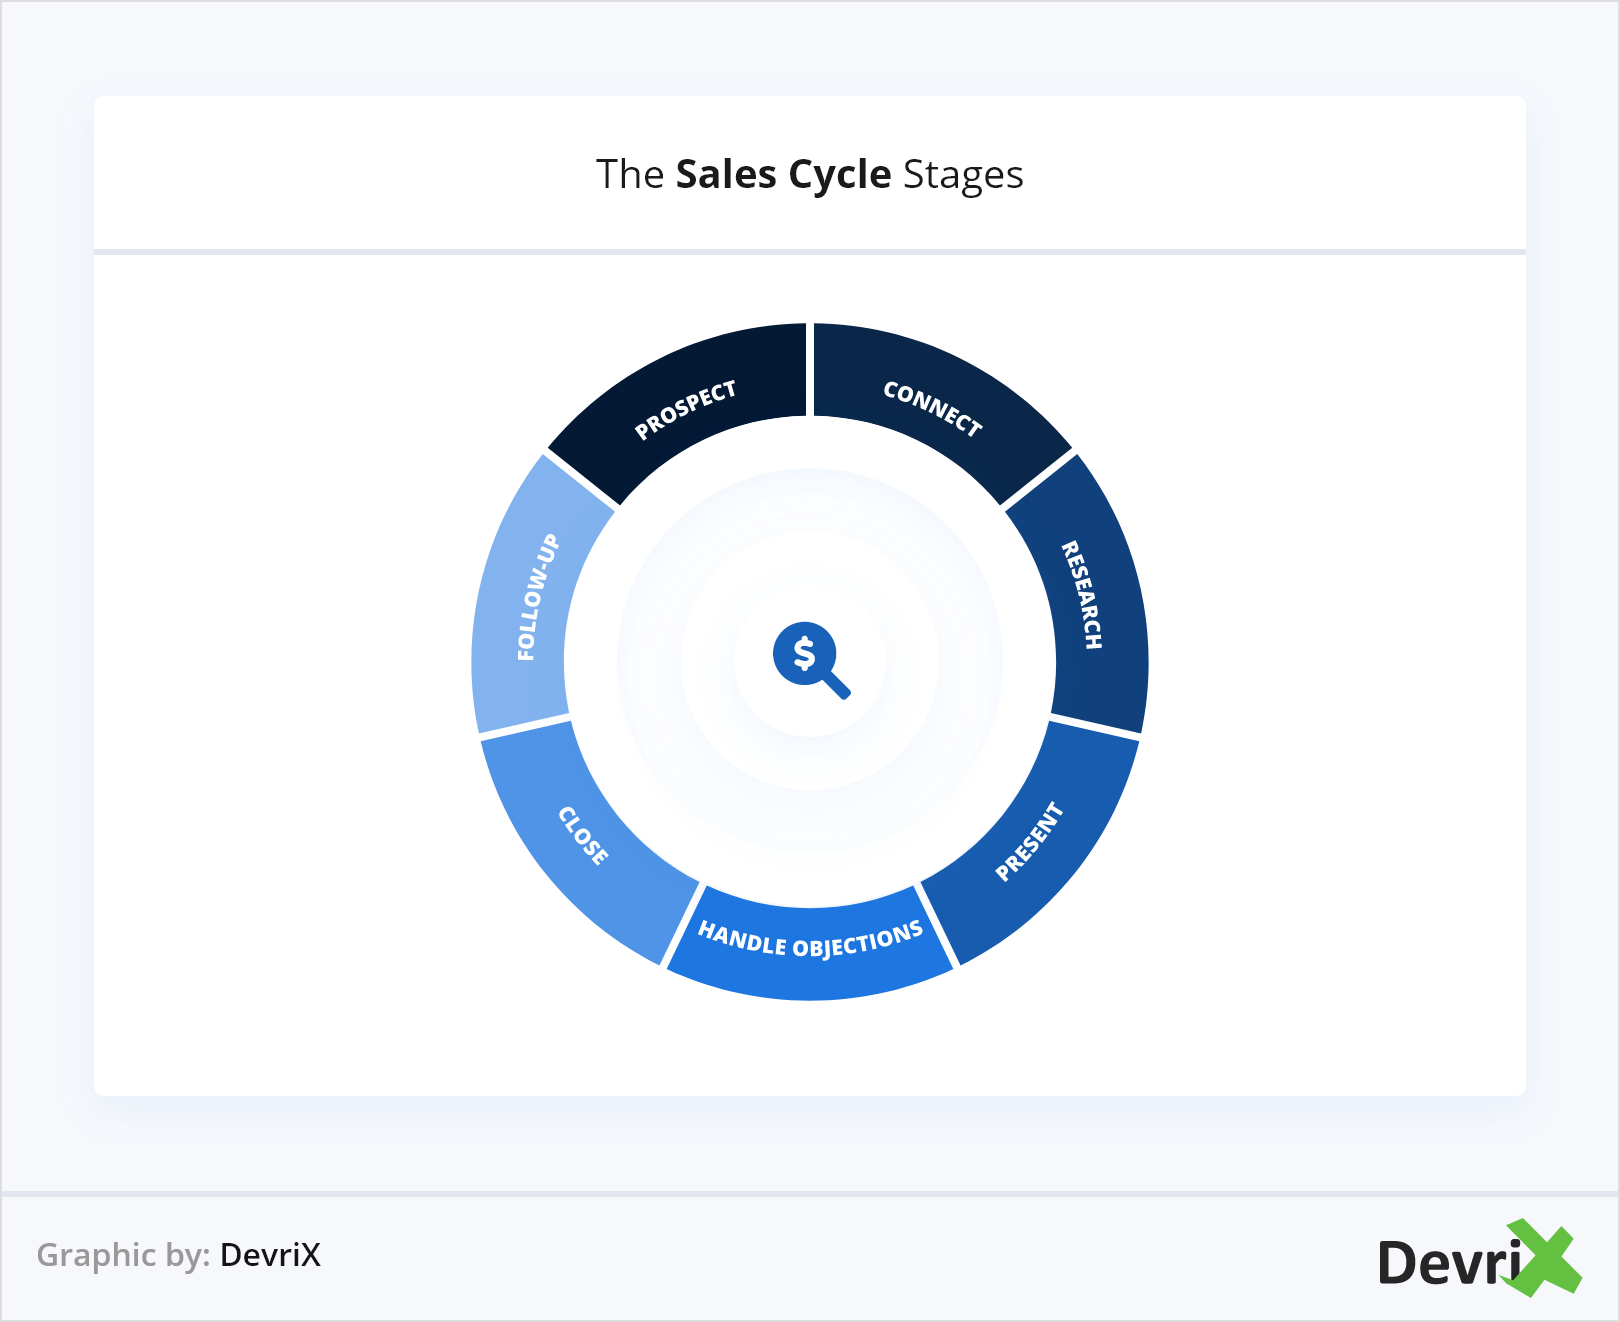 The Sales Cycle Stages